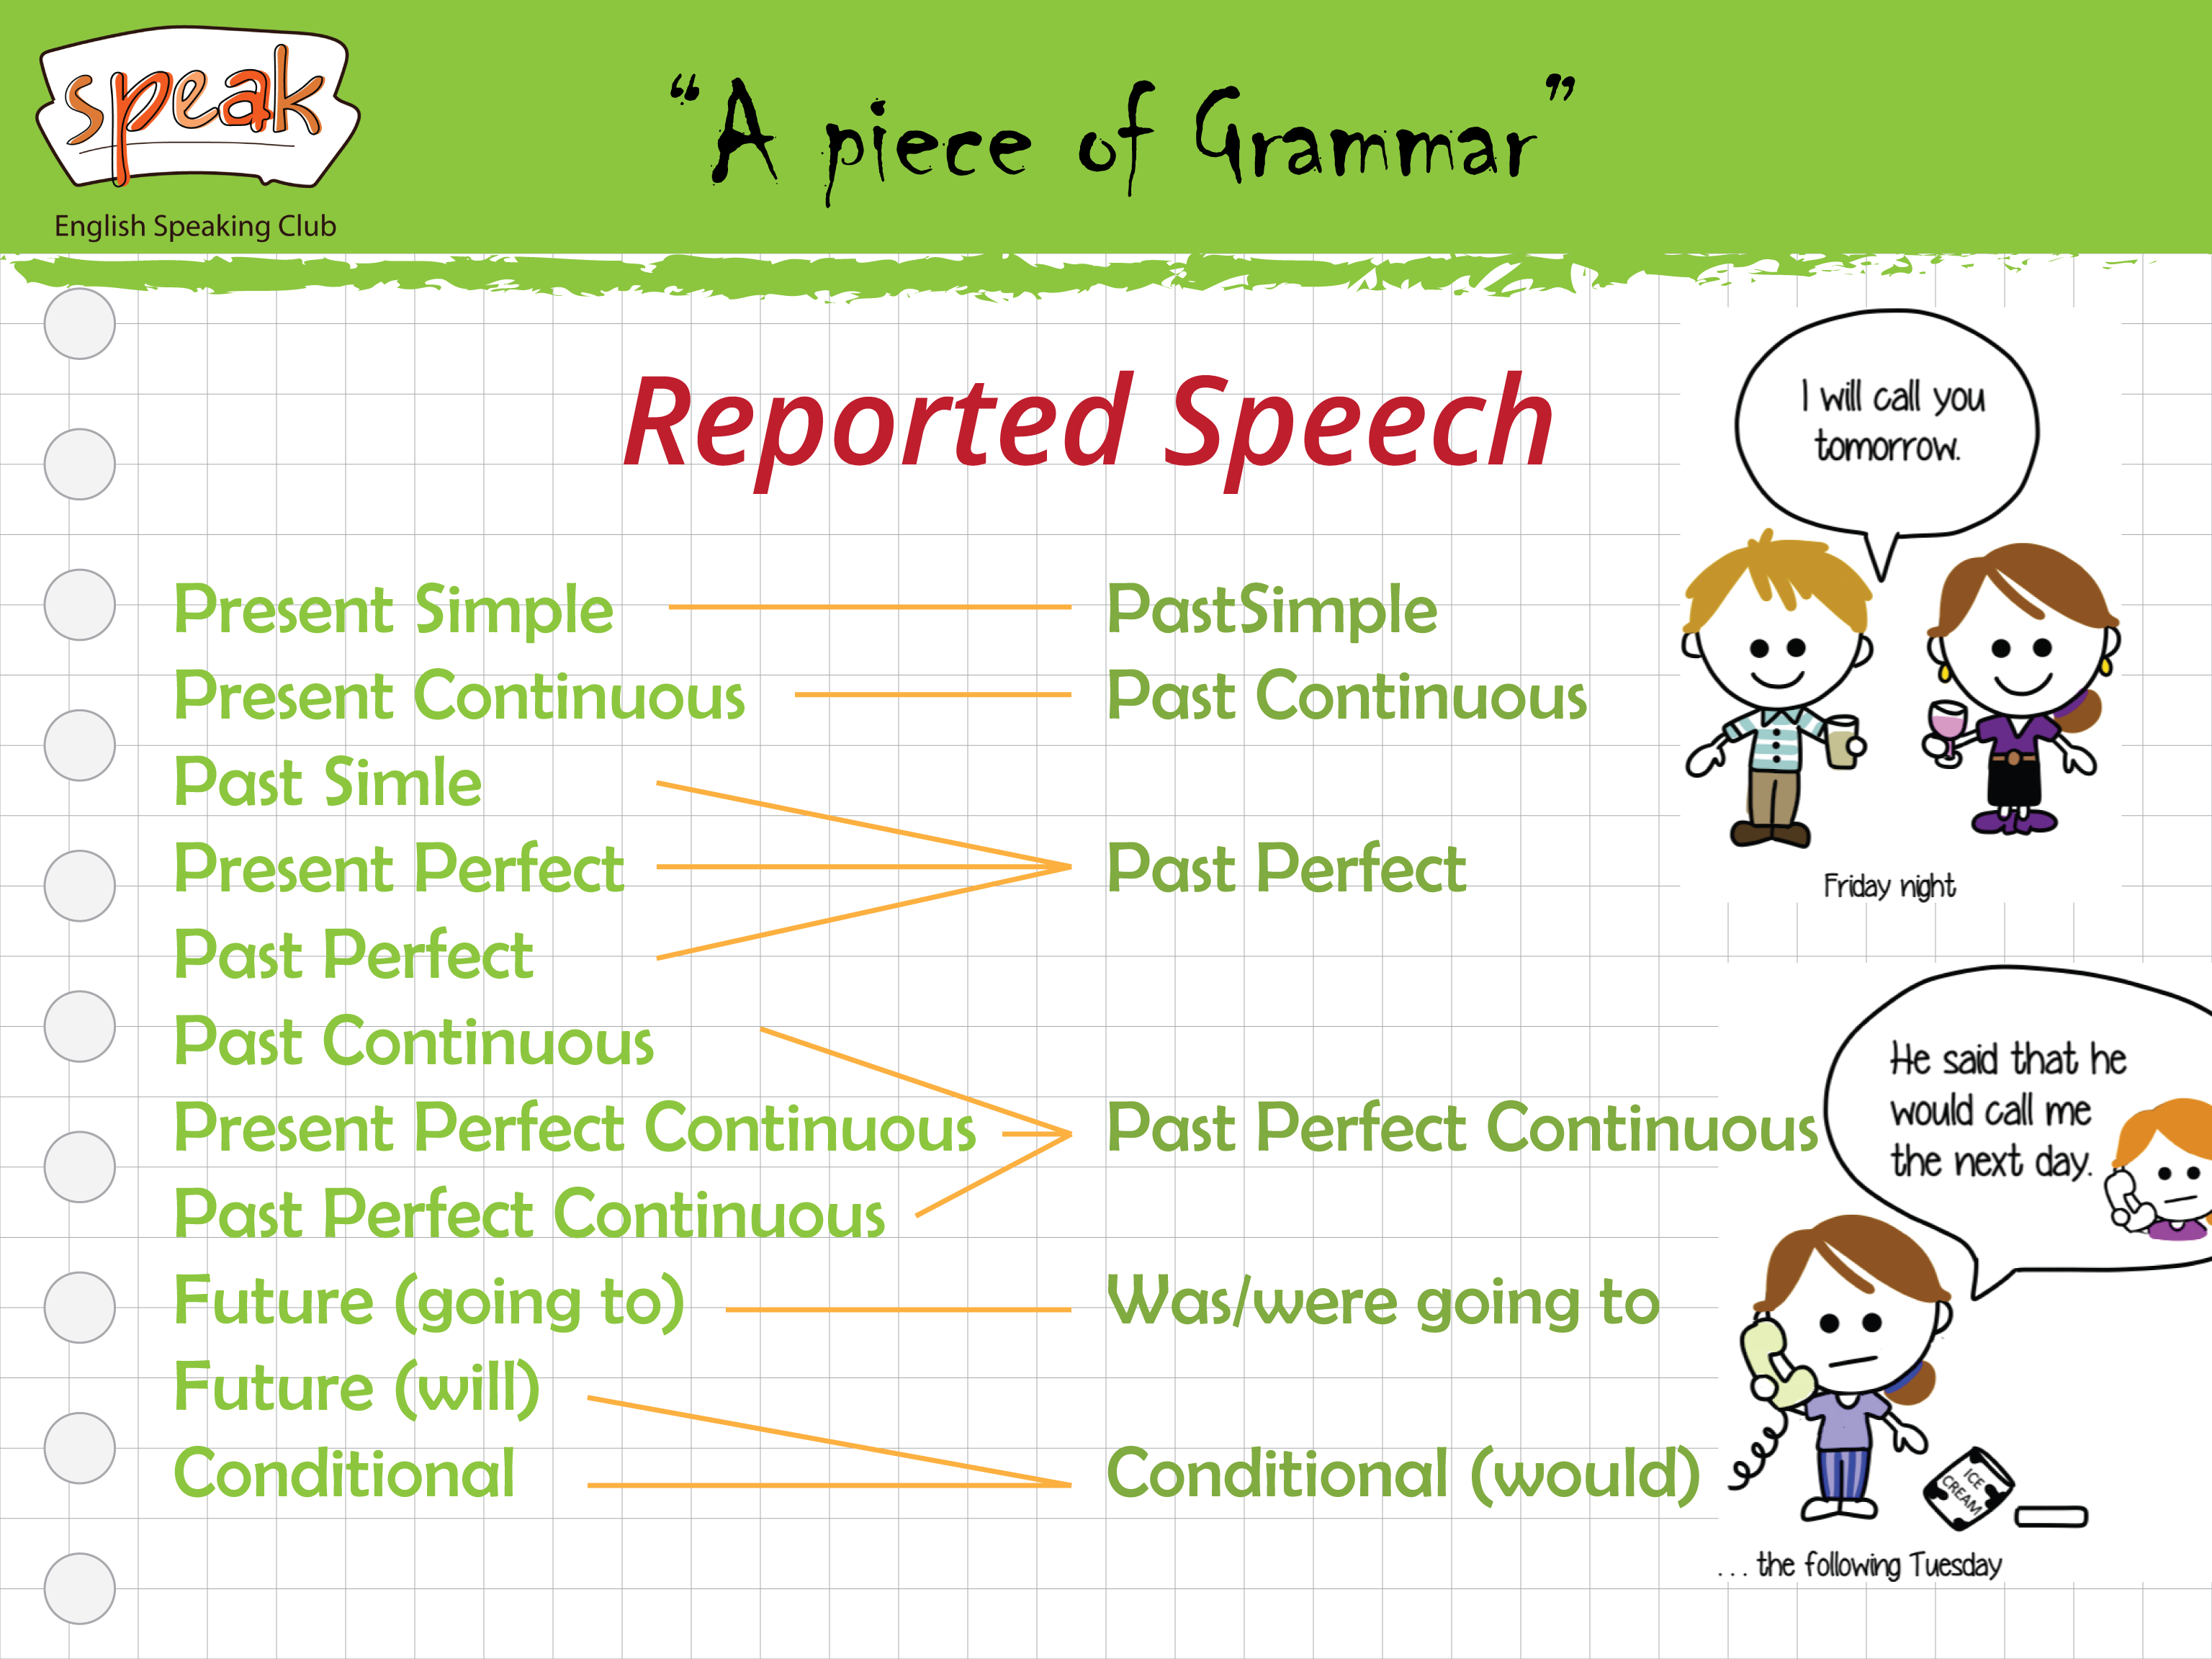 direct into indirect speech